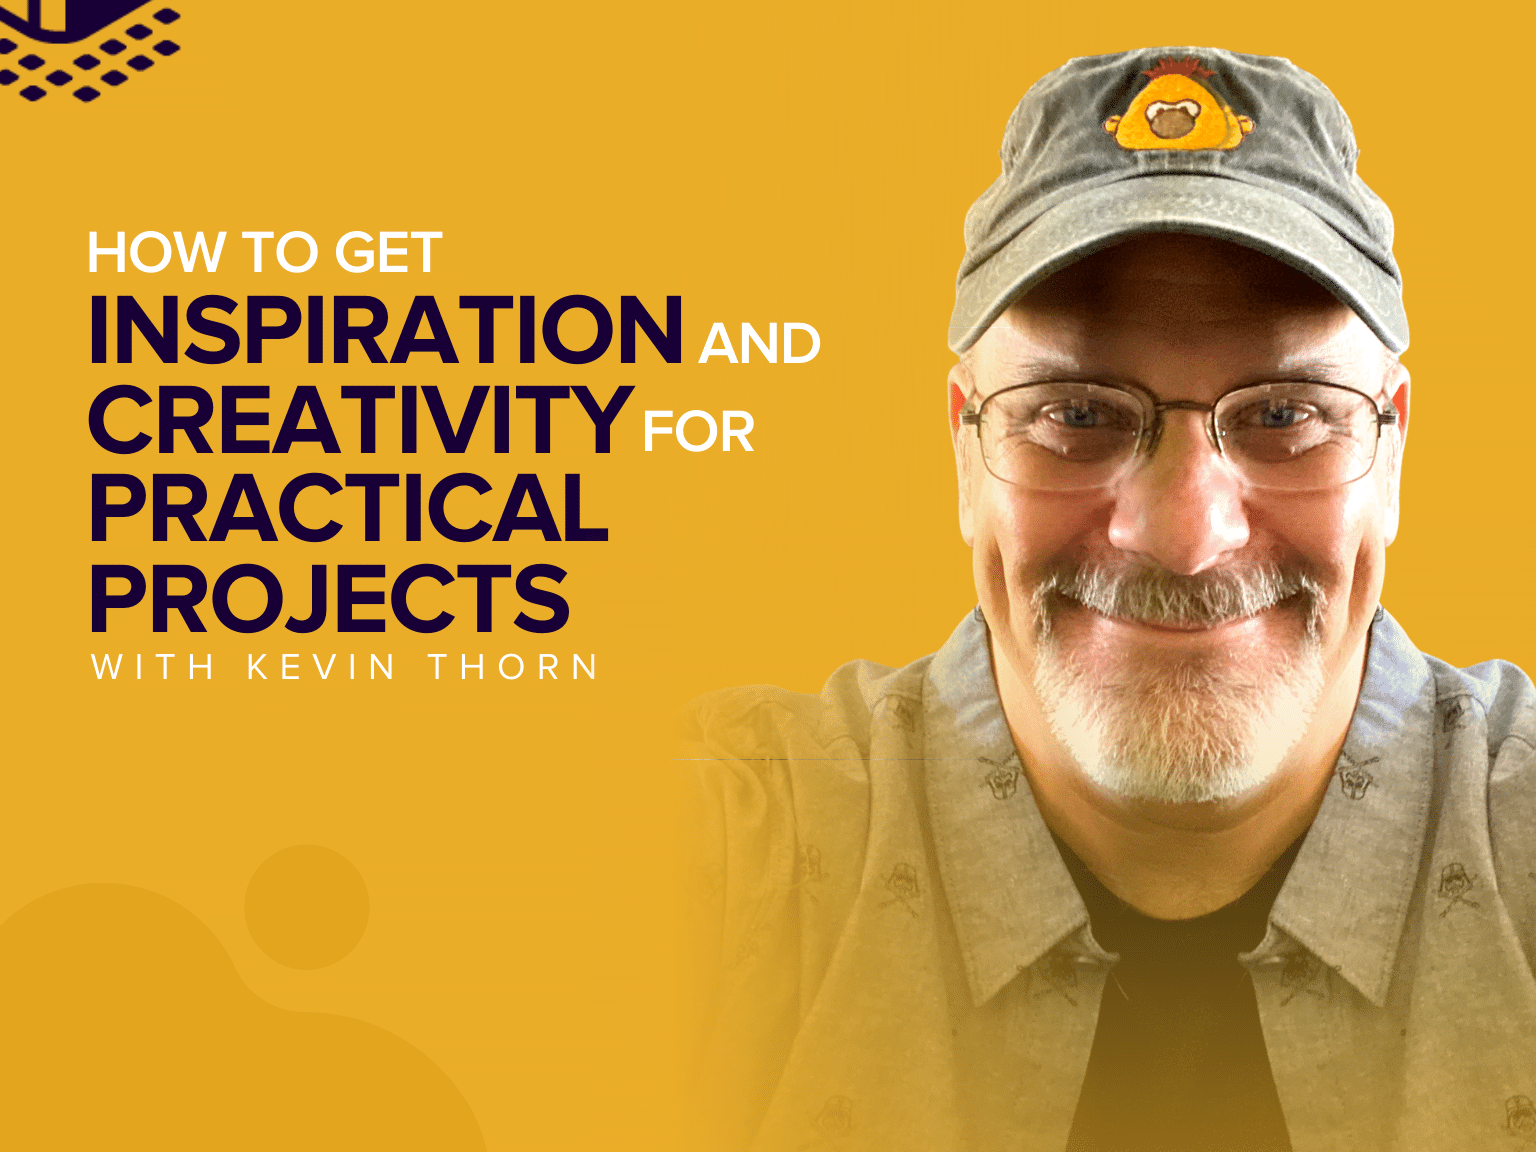 How to Get Inspiration and Creativity For Practical Projects with Kevin Thorn